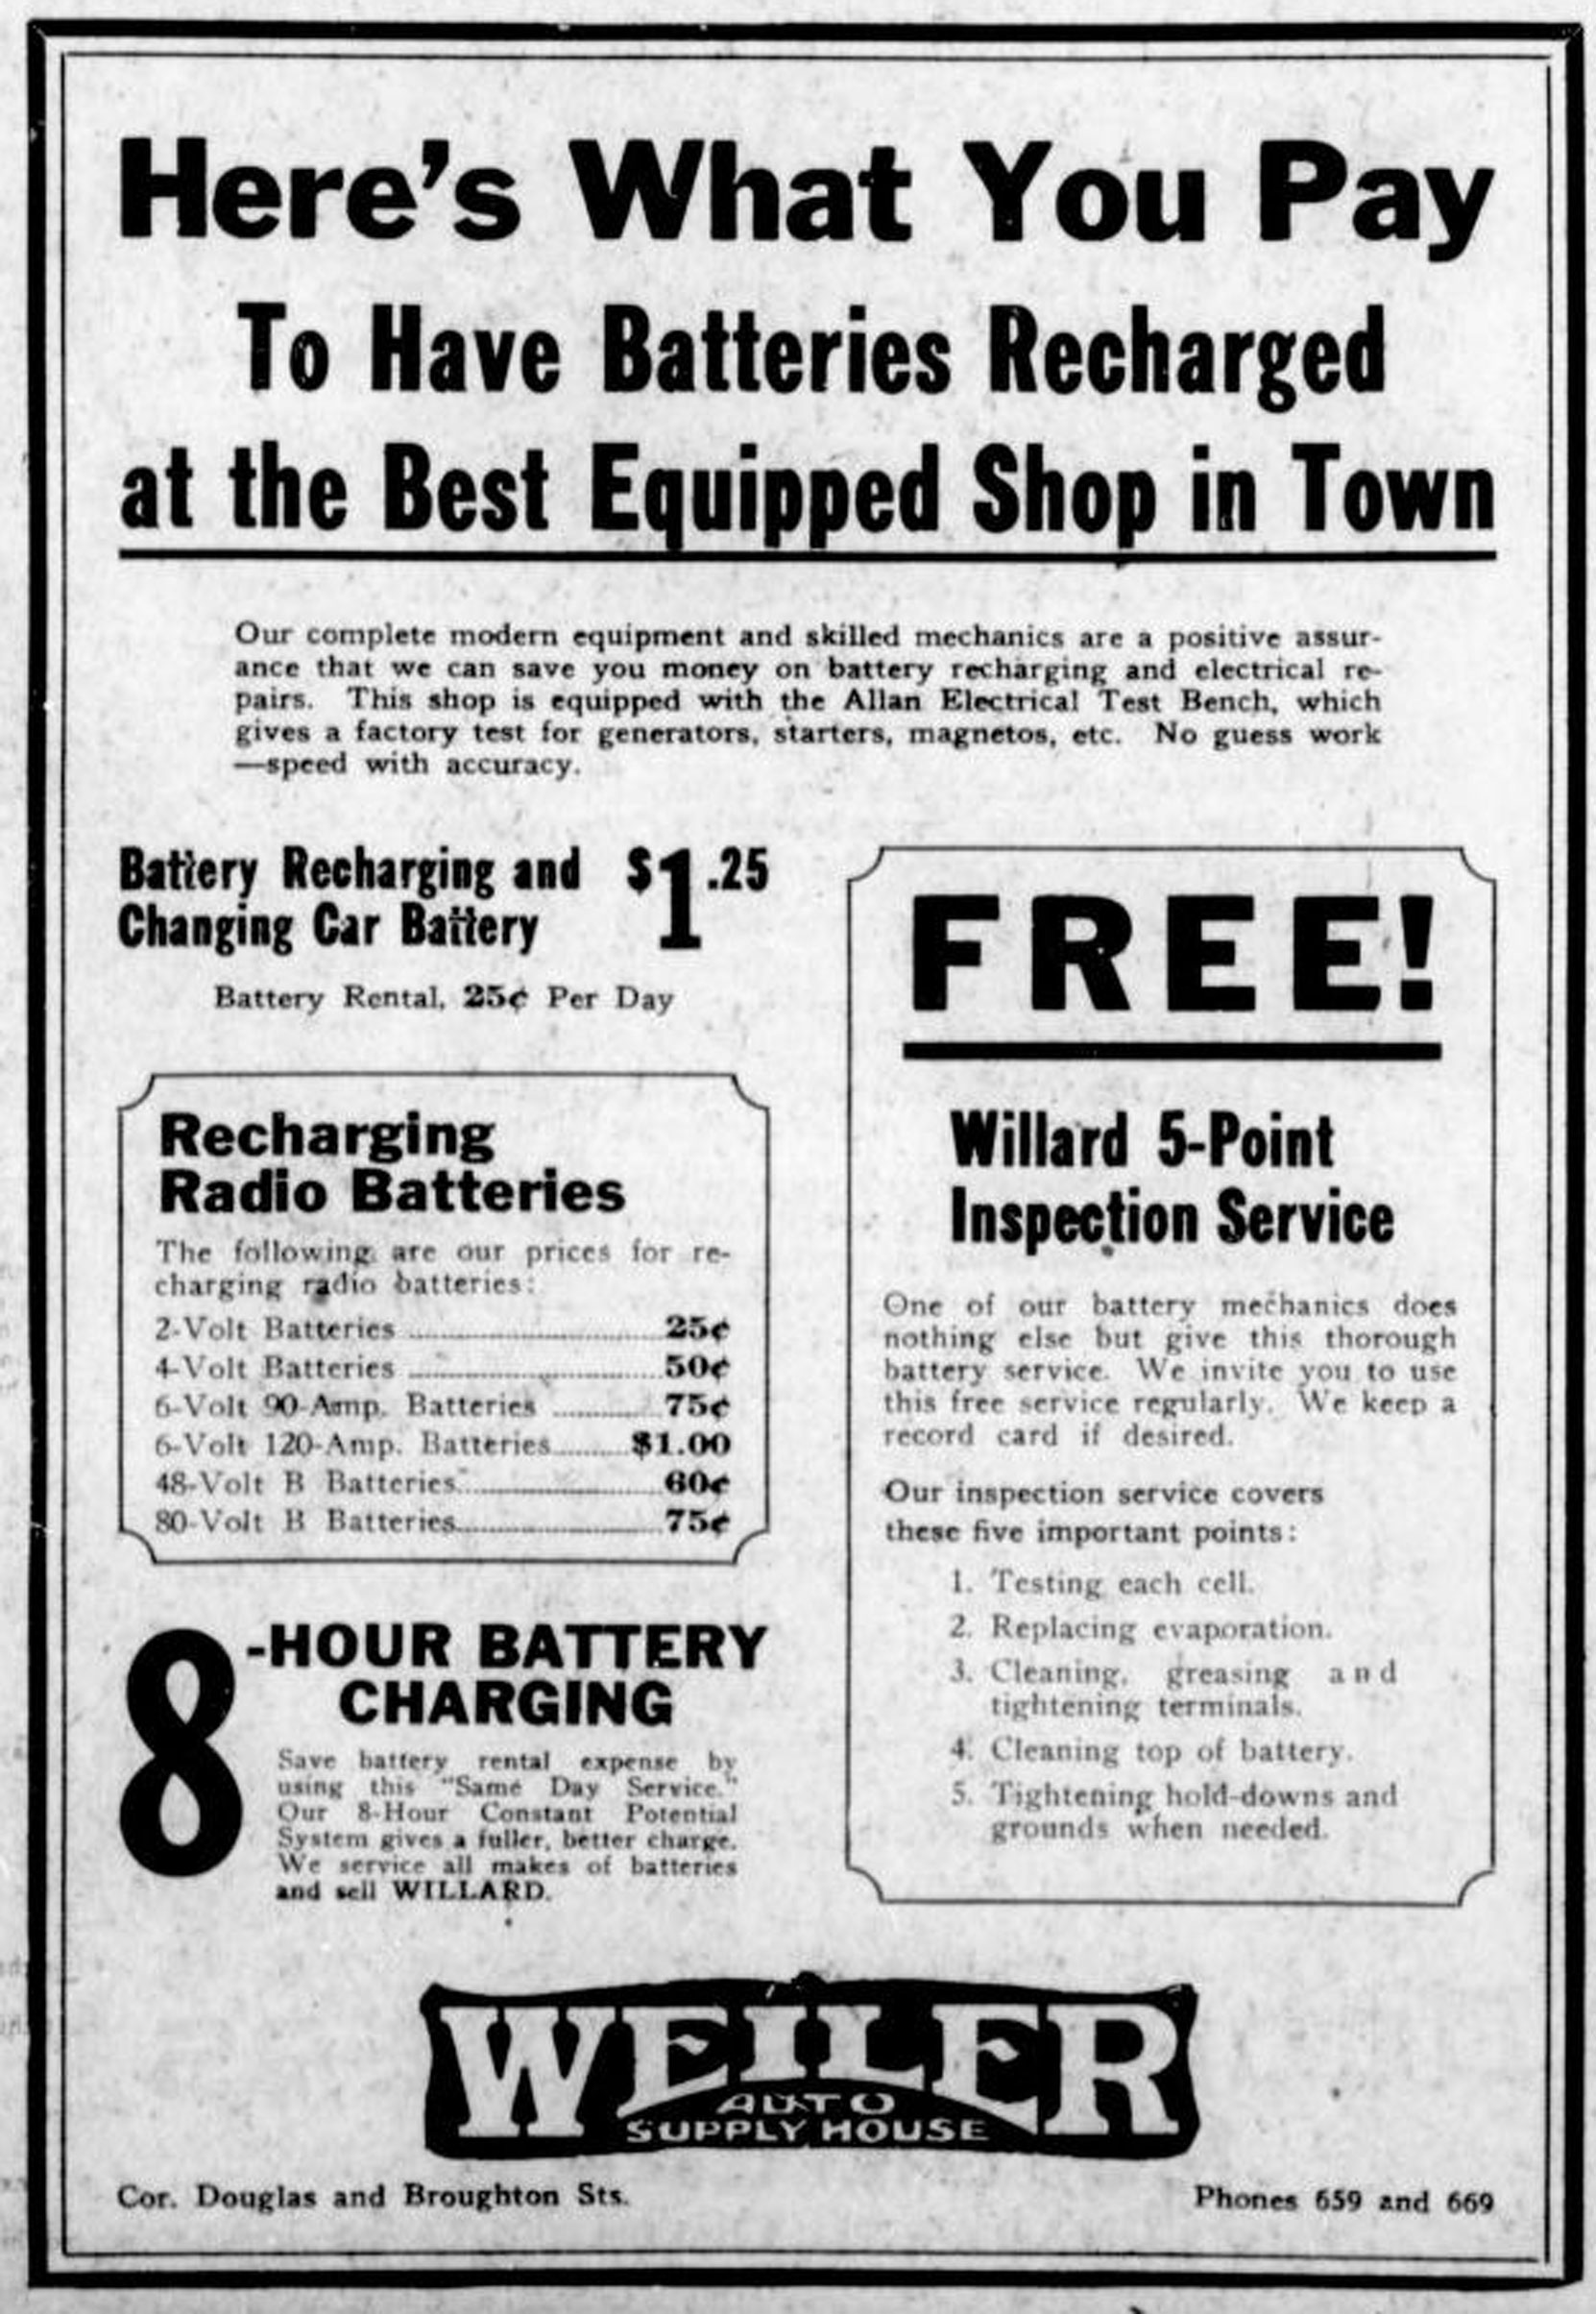 1926 advertisement for Weiler Auto Supply House, 1000-1012 Douglas Street, at Broughton Street (Victoria Online Sightseeing Tours collection)